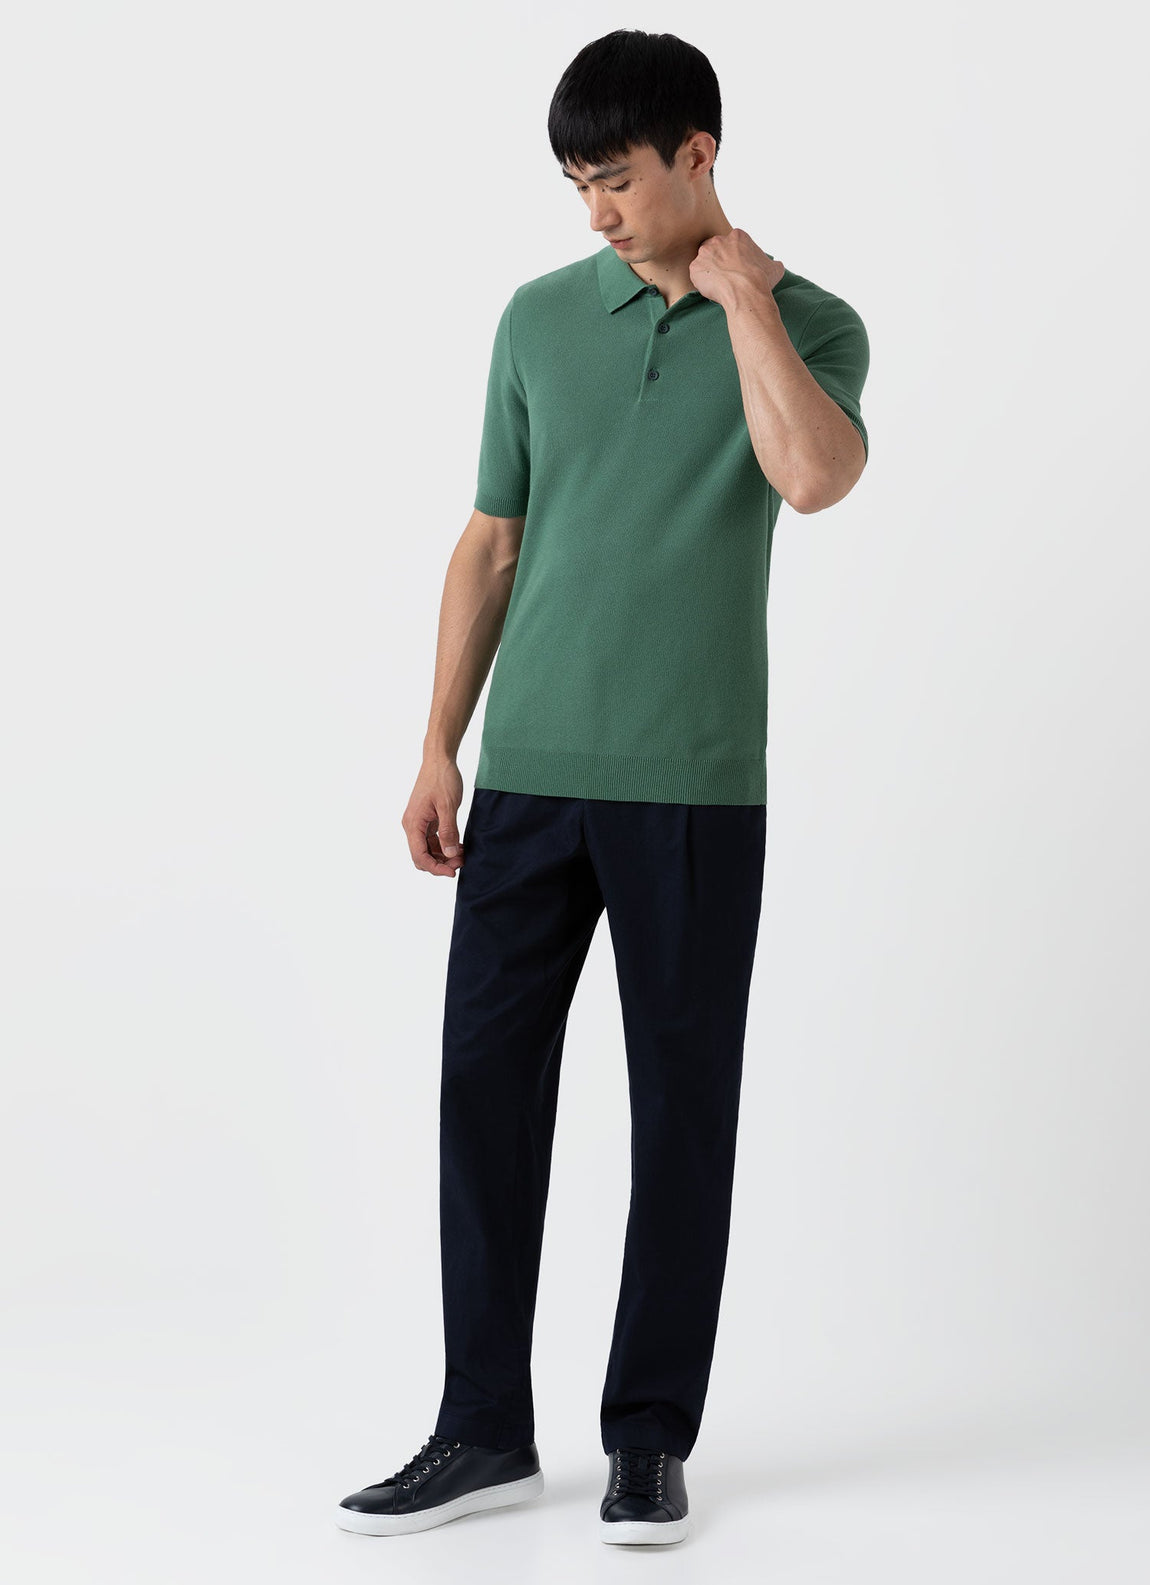 Men's Knit Polo Shirt in Thyme